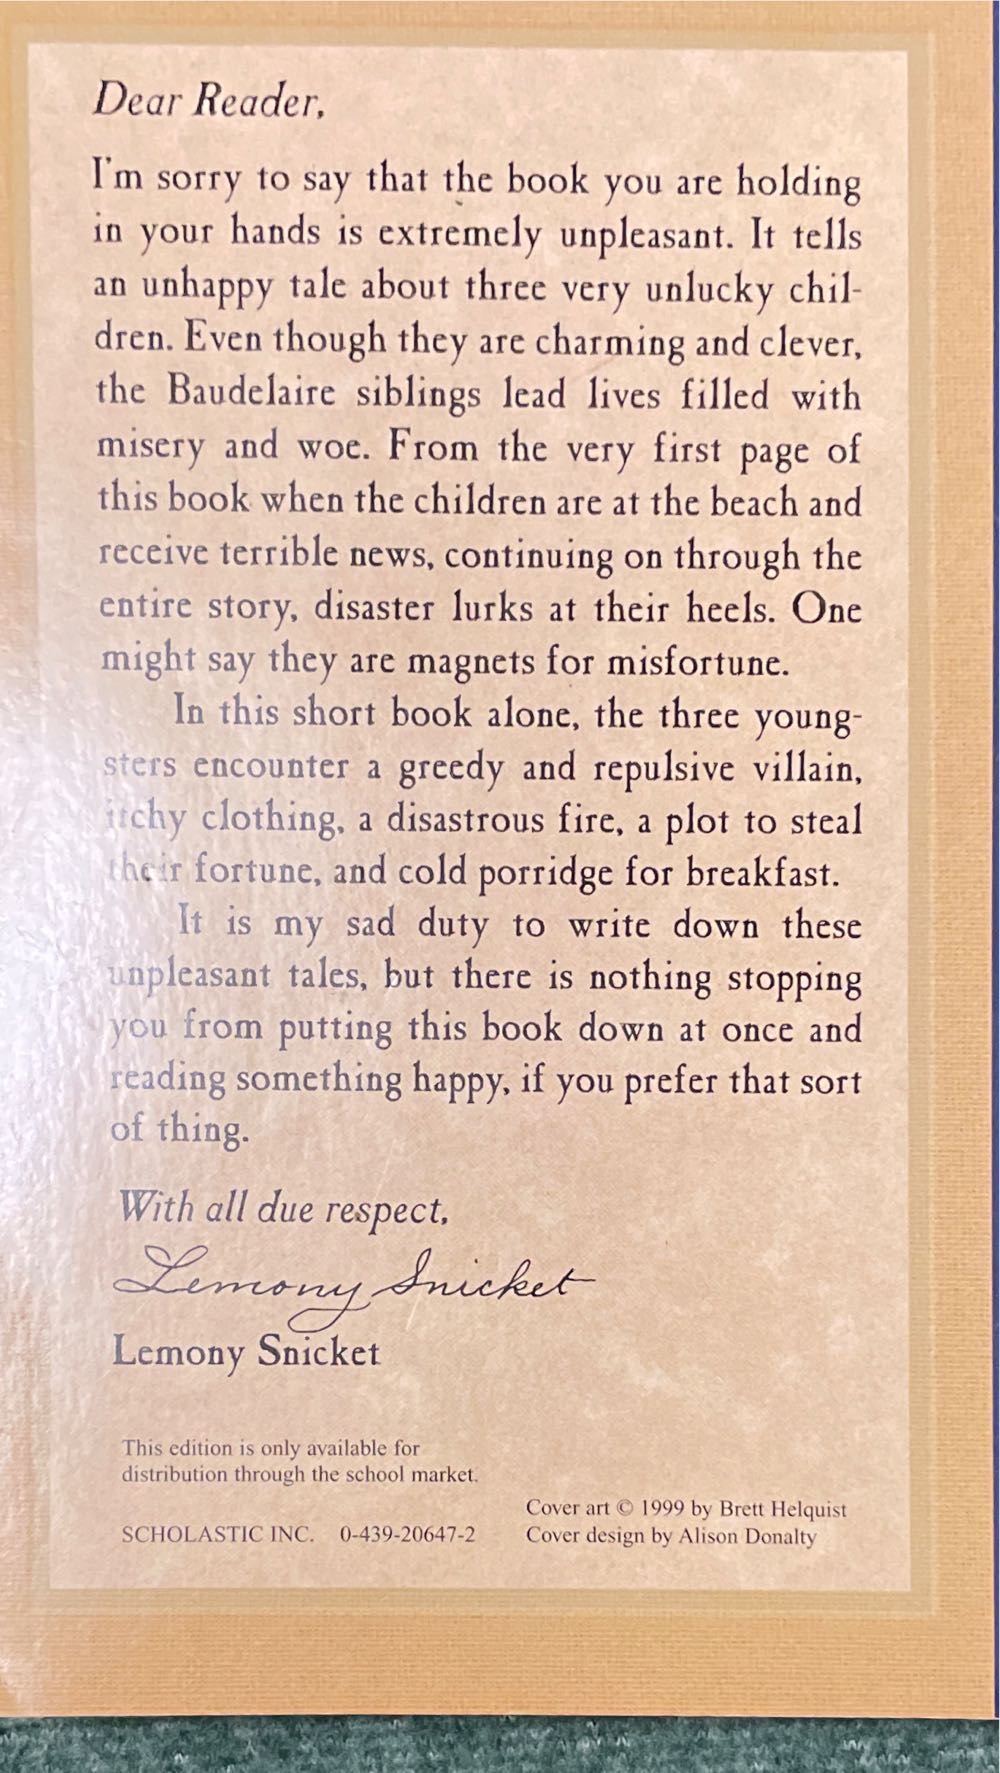 A Series Of Unfortunate Events #1: The Bad Beginning - Lemony Snicket (Scholastic Inc. - Paperback) book collectible [Barcode 9780439206471] - Main Image 2